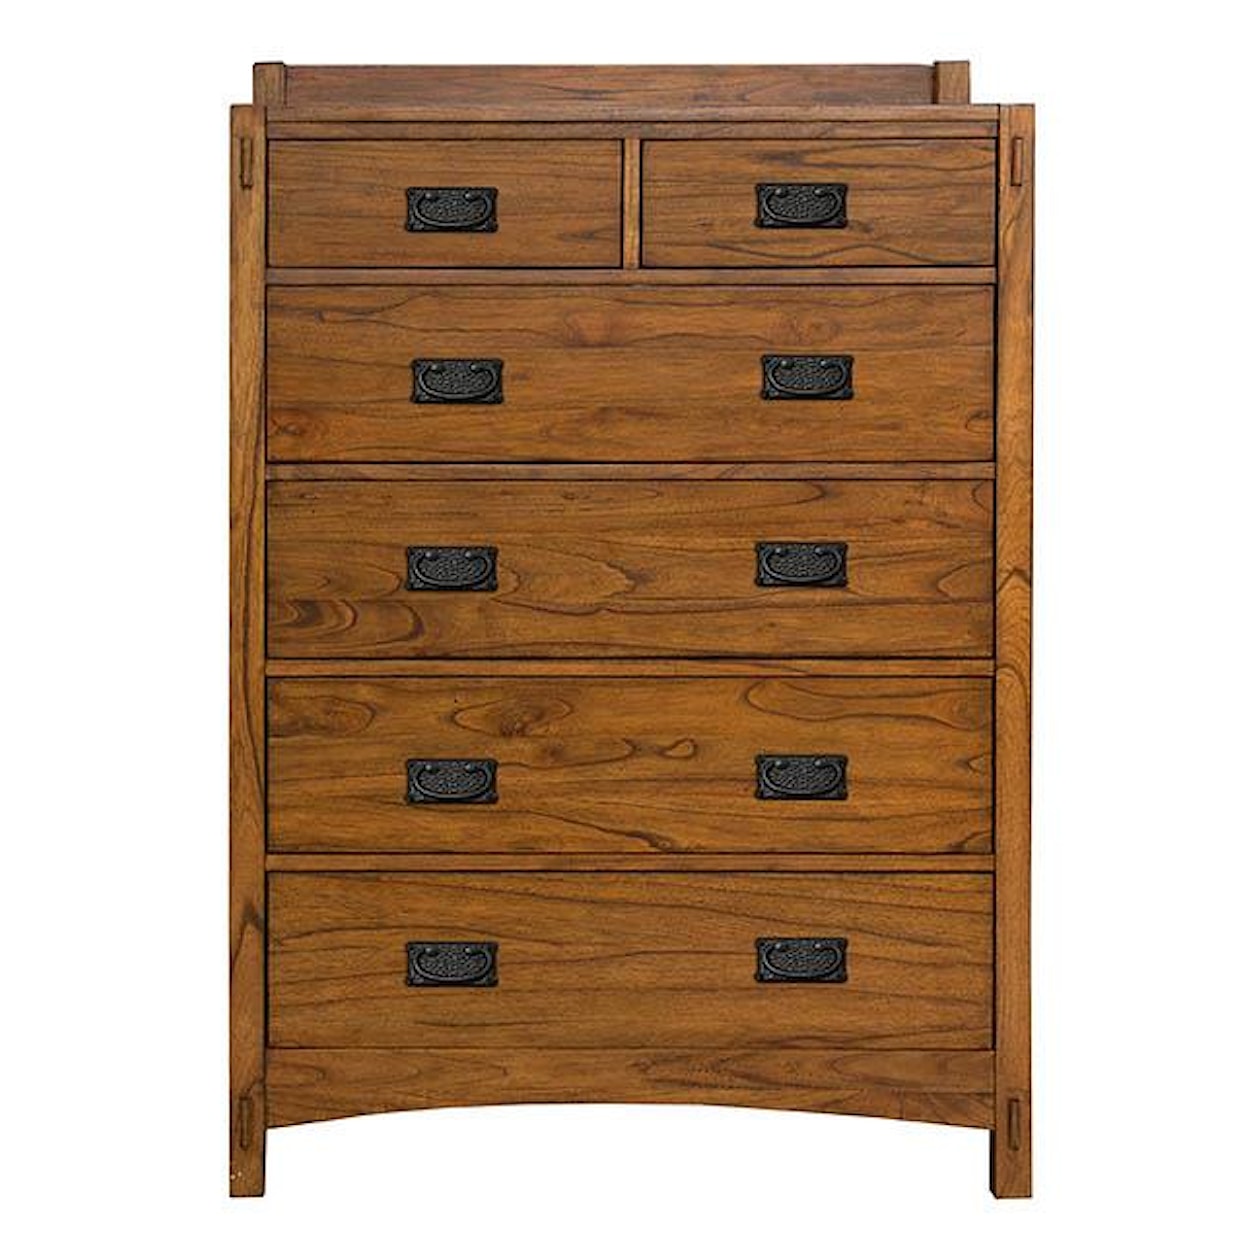 AAmerica Mission Hill 6 Drawer Chest